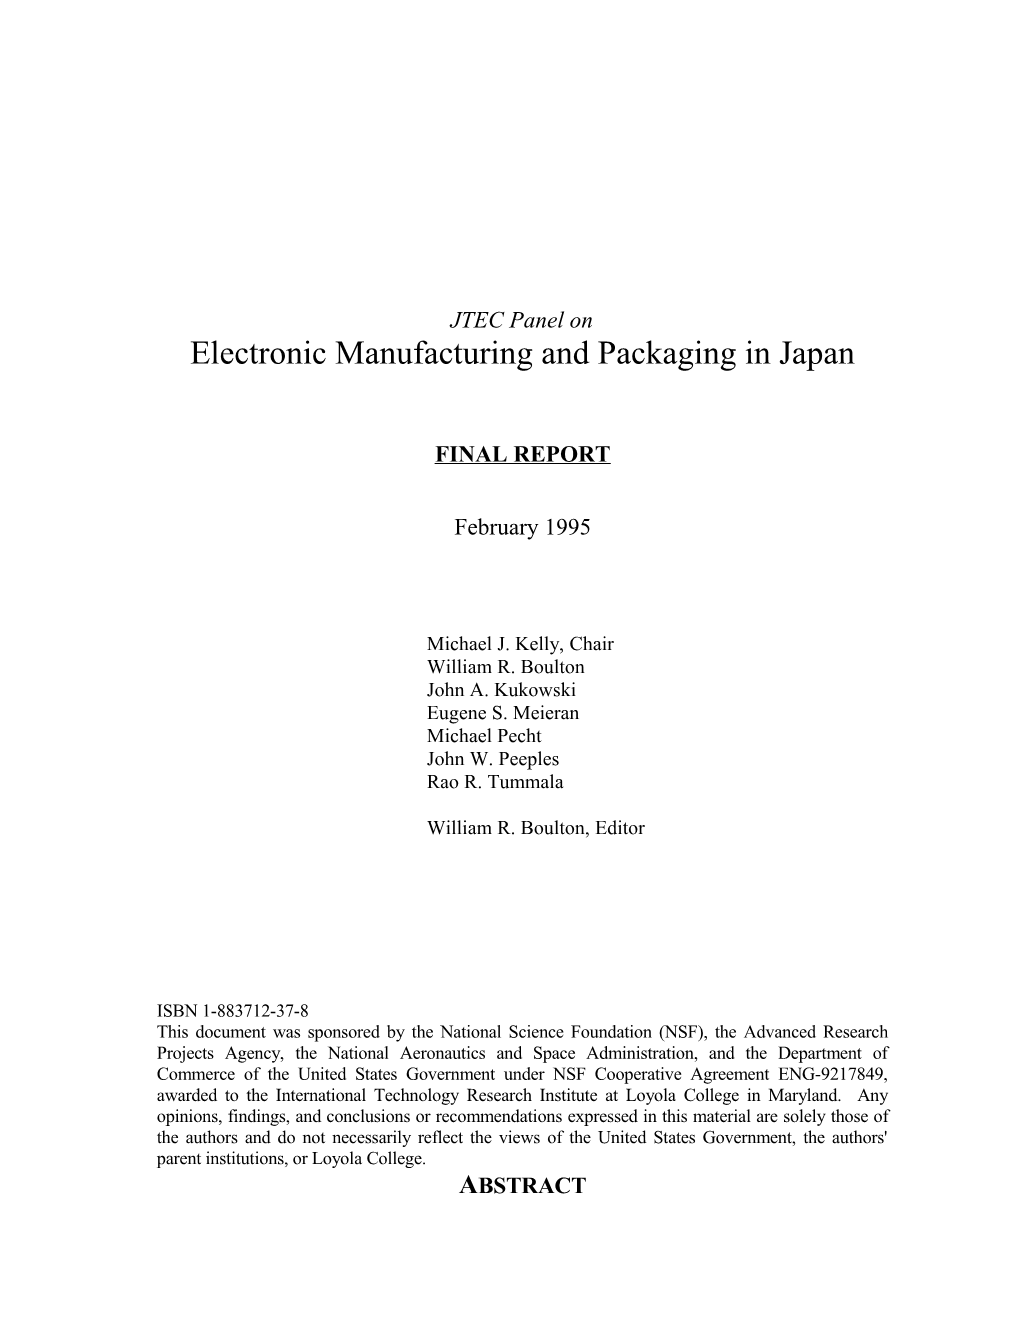 Electronic Manufacturing and Packaging in Japan